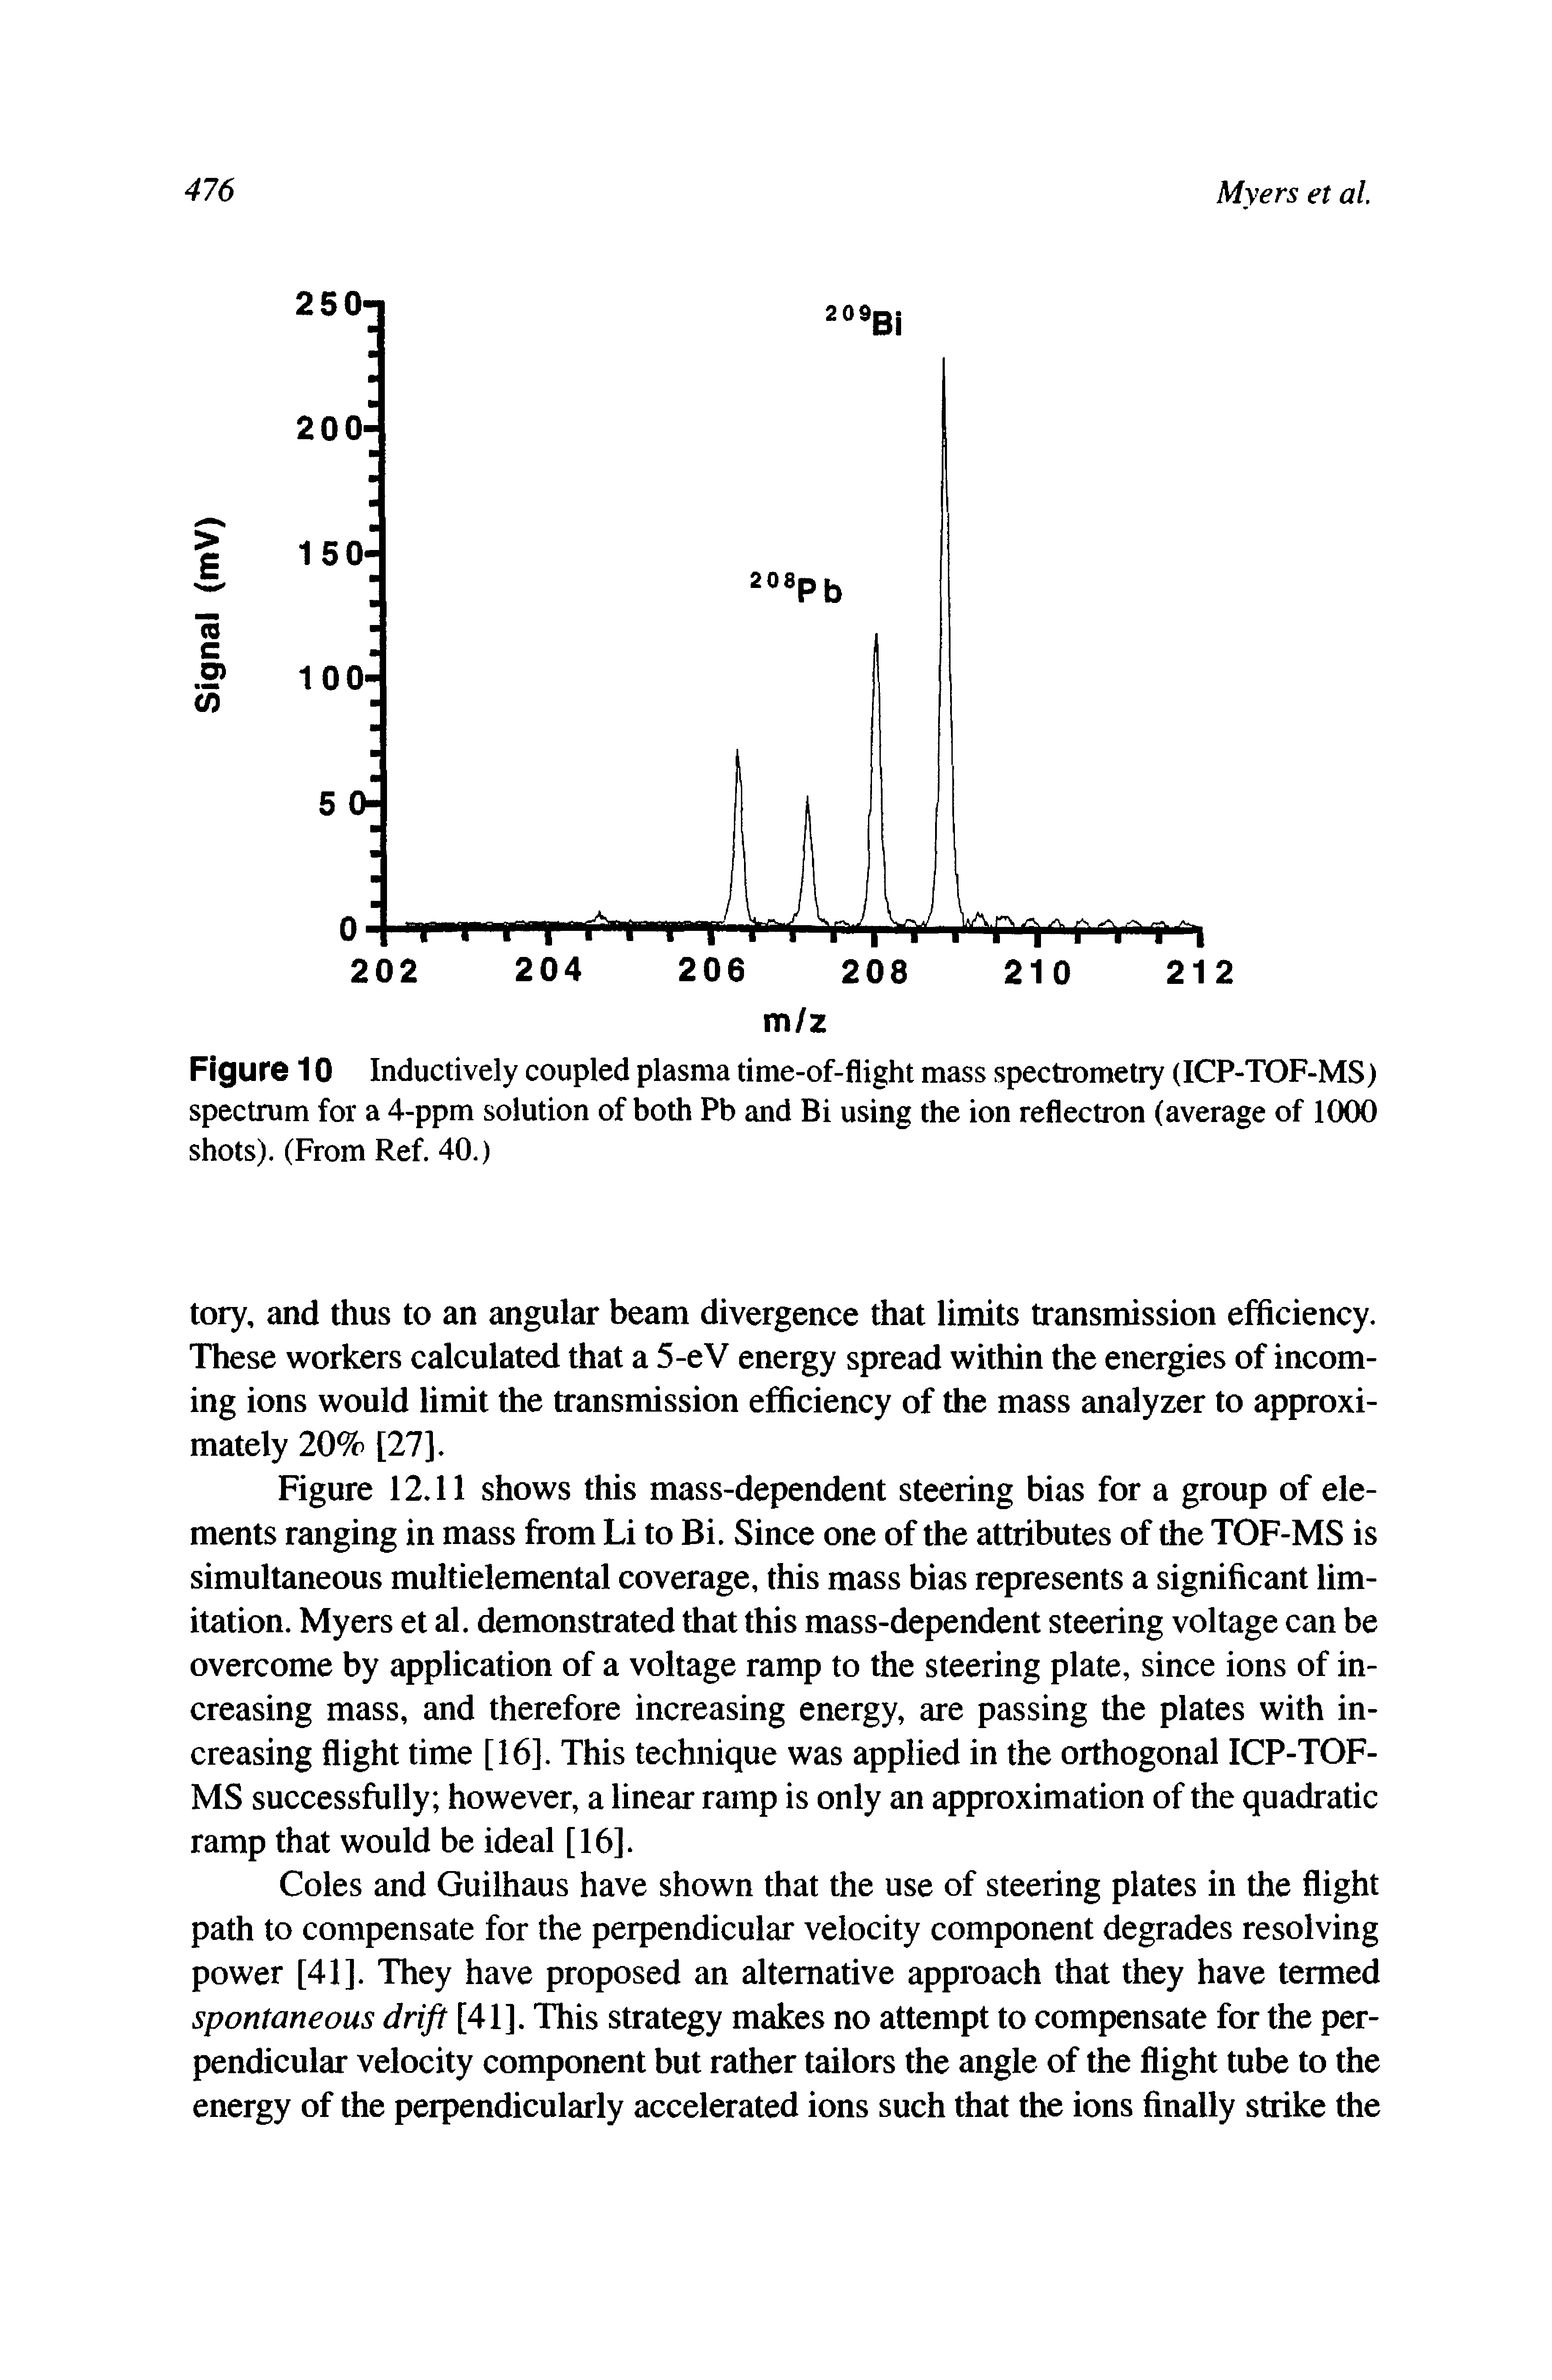 Figure 10 Inductively coupled plasma time-of-flight mass spectrometry (ICP-TOF-MS) spectrum for a 4-ppm solution of both Pb and Bi using the ion reflectron (average of 1000 shots). (From Ref. 40.)...